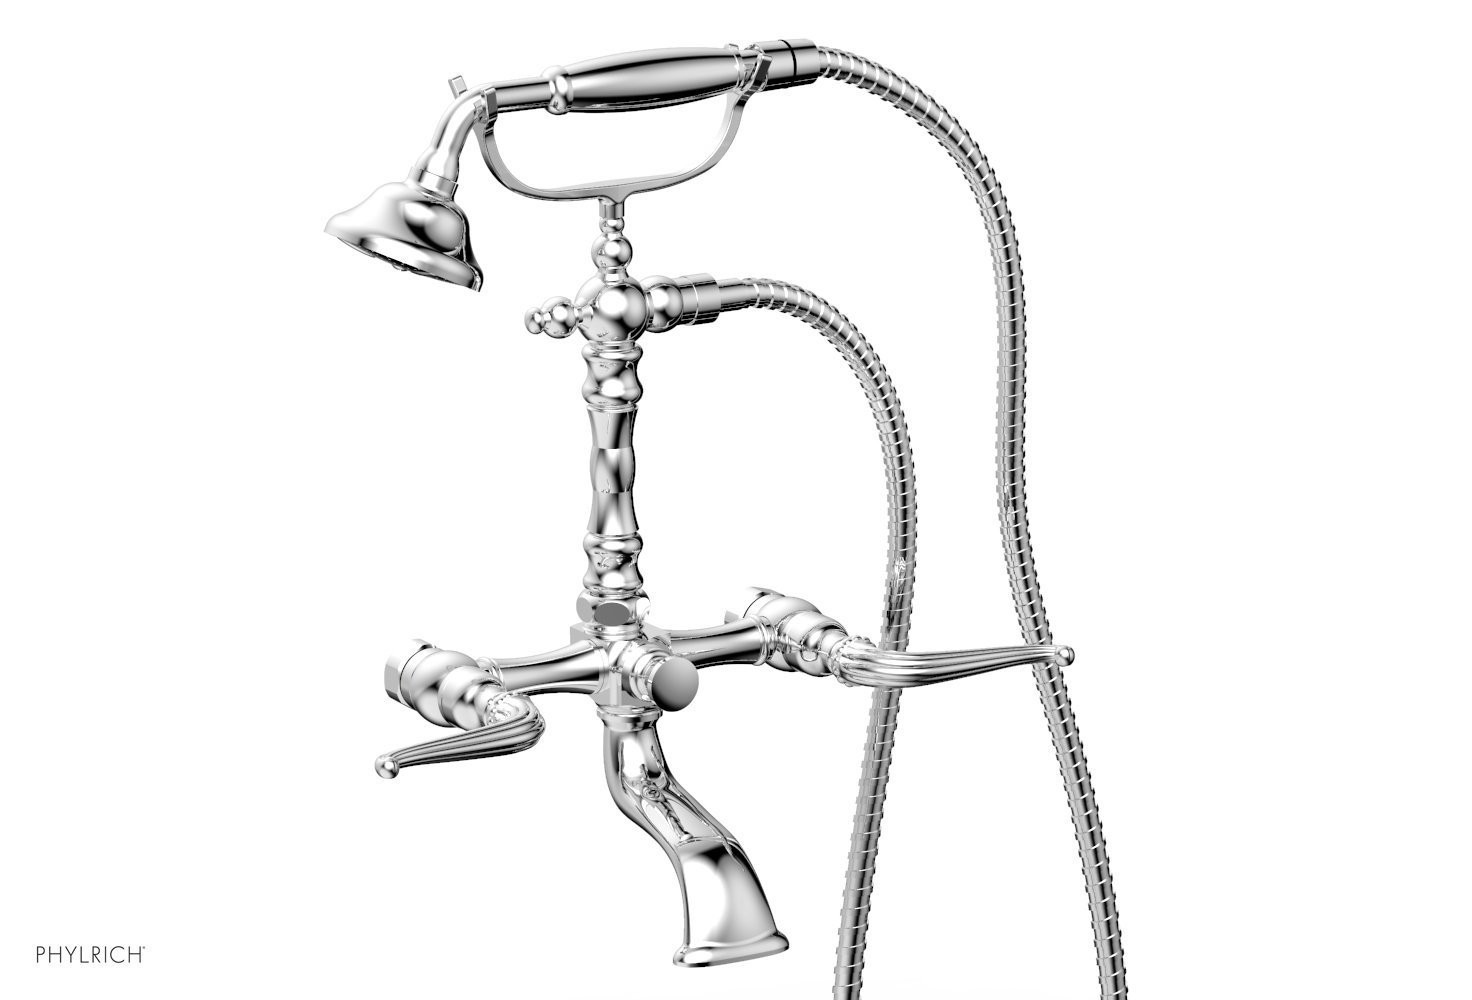 PHYLRICH K2393-18 GEORGIAN & BARCELONA TWO HOLES WALL MOUNT EXPOSED TUB FILLER WITH HAND SHOWER AND LEVER HANDLE